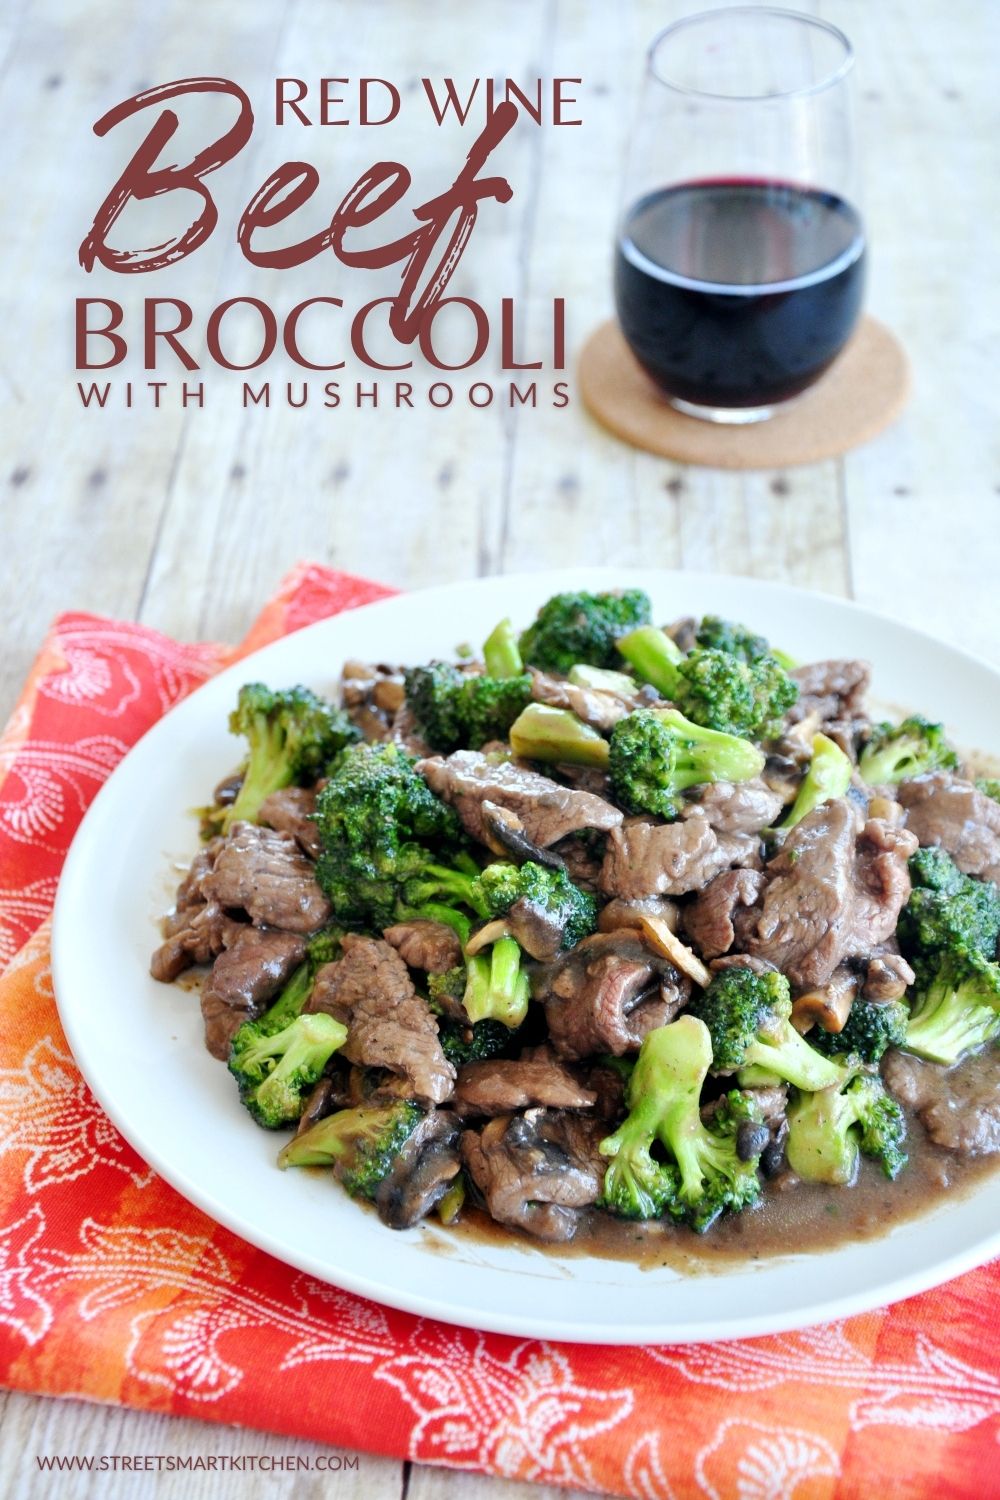 In less than 30 minutes, you can make a delicious beef broccoli dish at home without going out whenever you crave Chinese food!